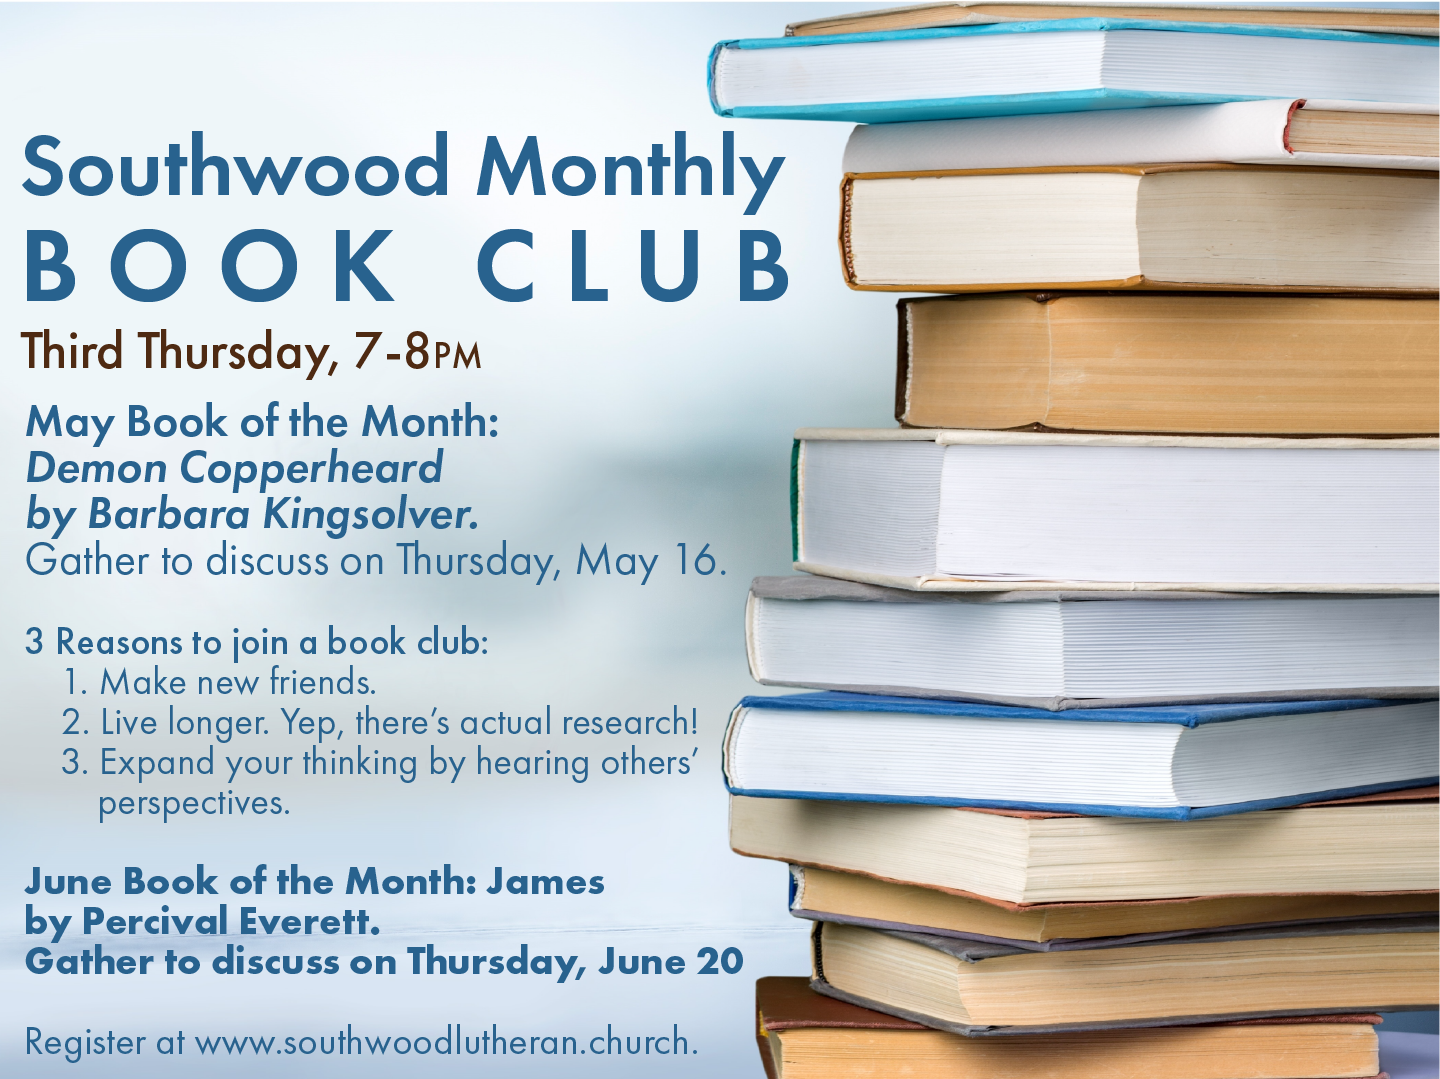 Southwood Monthly Book Club